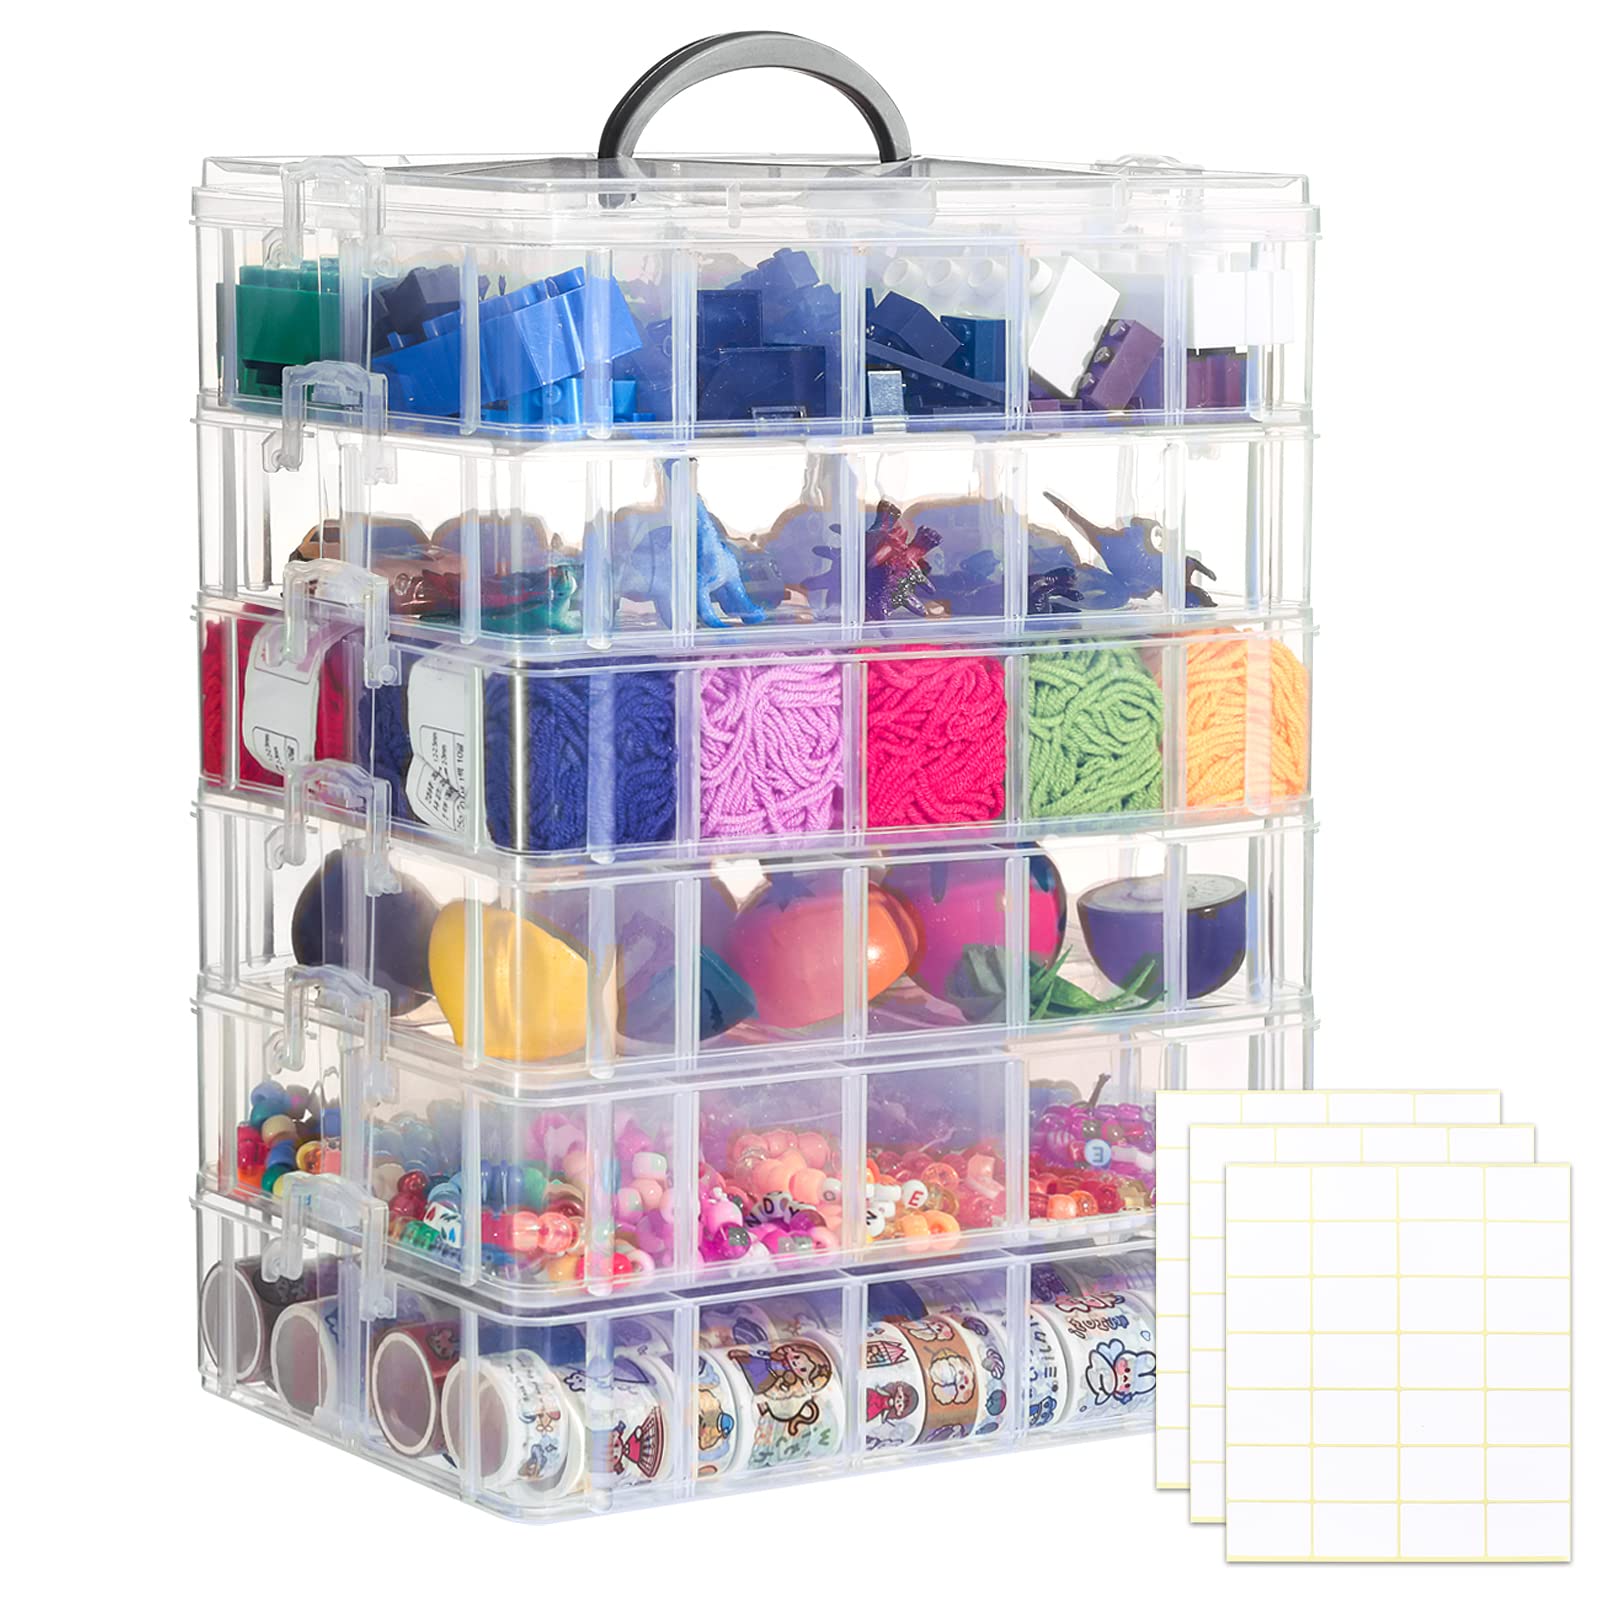 Clear Stackable Storage Containers - 3 Tier